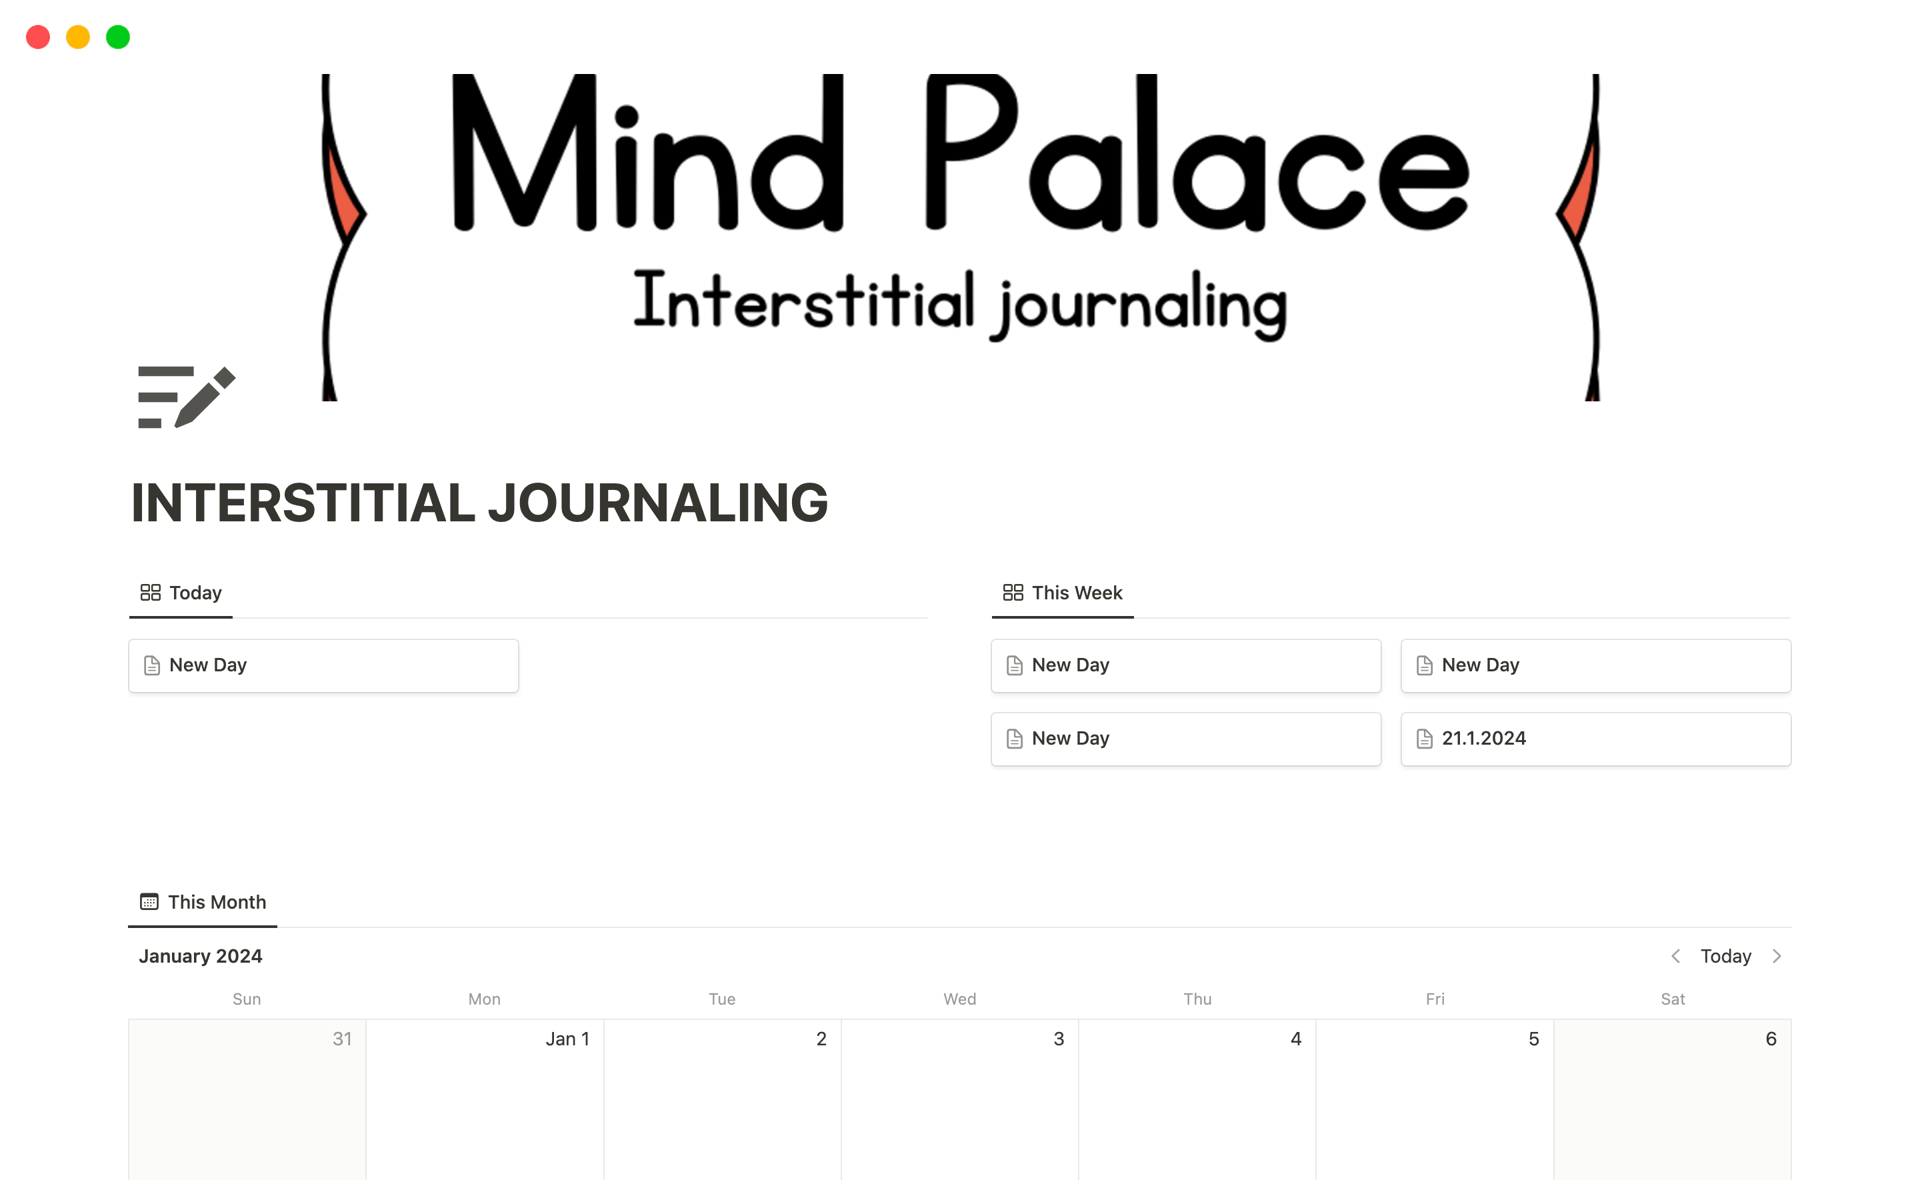 You'll get a notion template for your very own interstitial journal.
